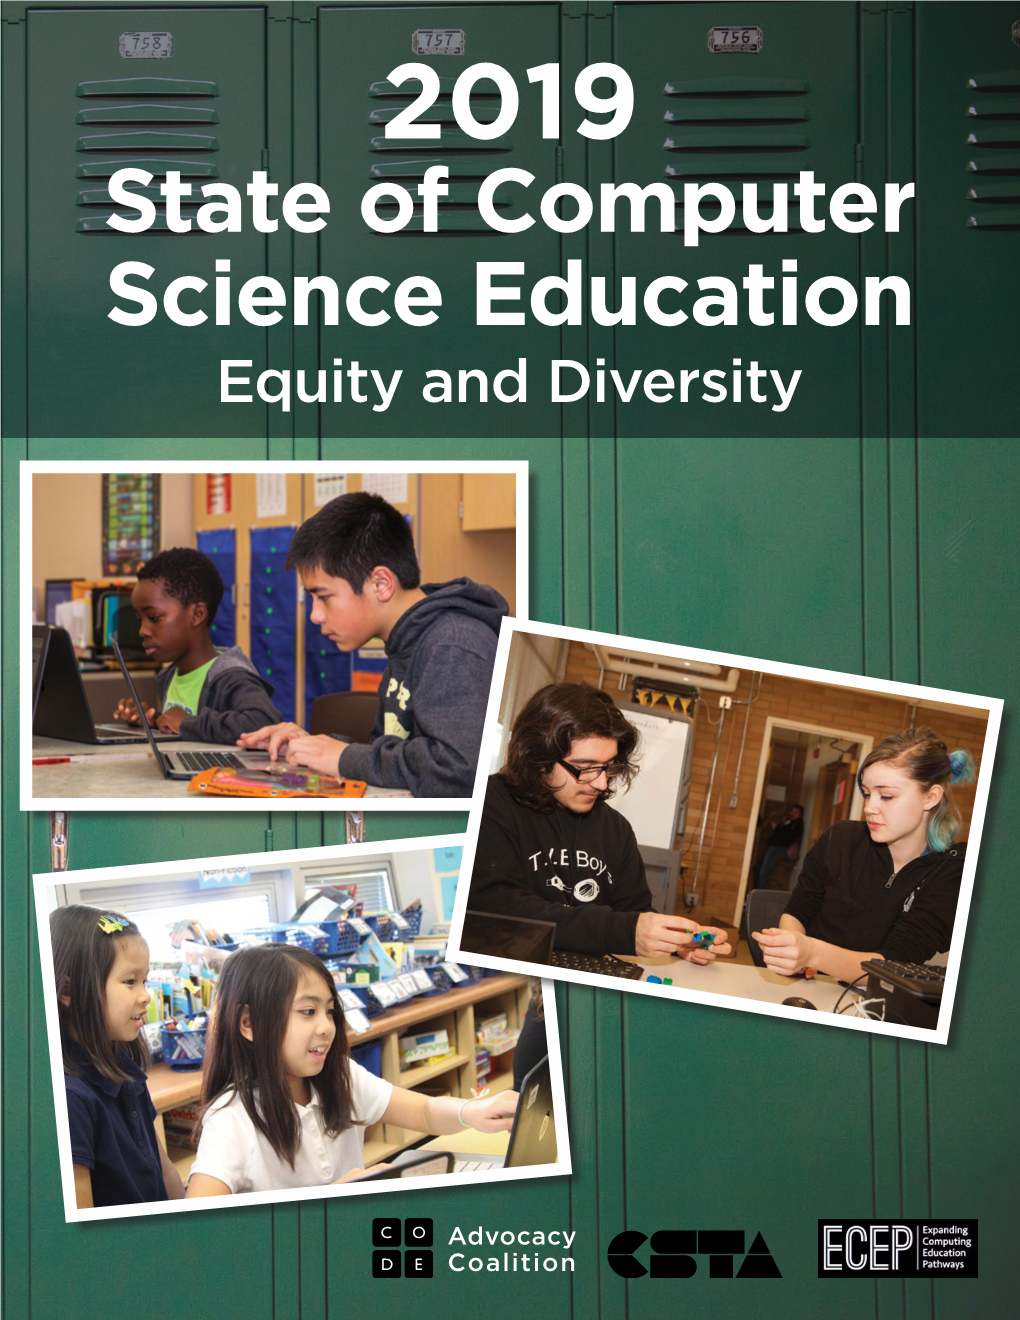 2019 State of Computer Science Education Equity and Diversity